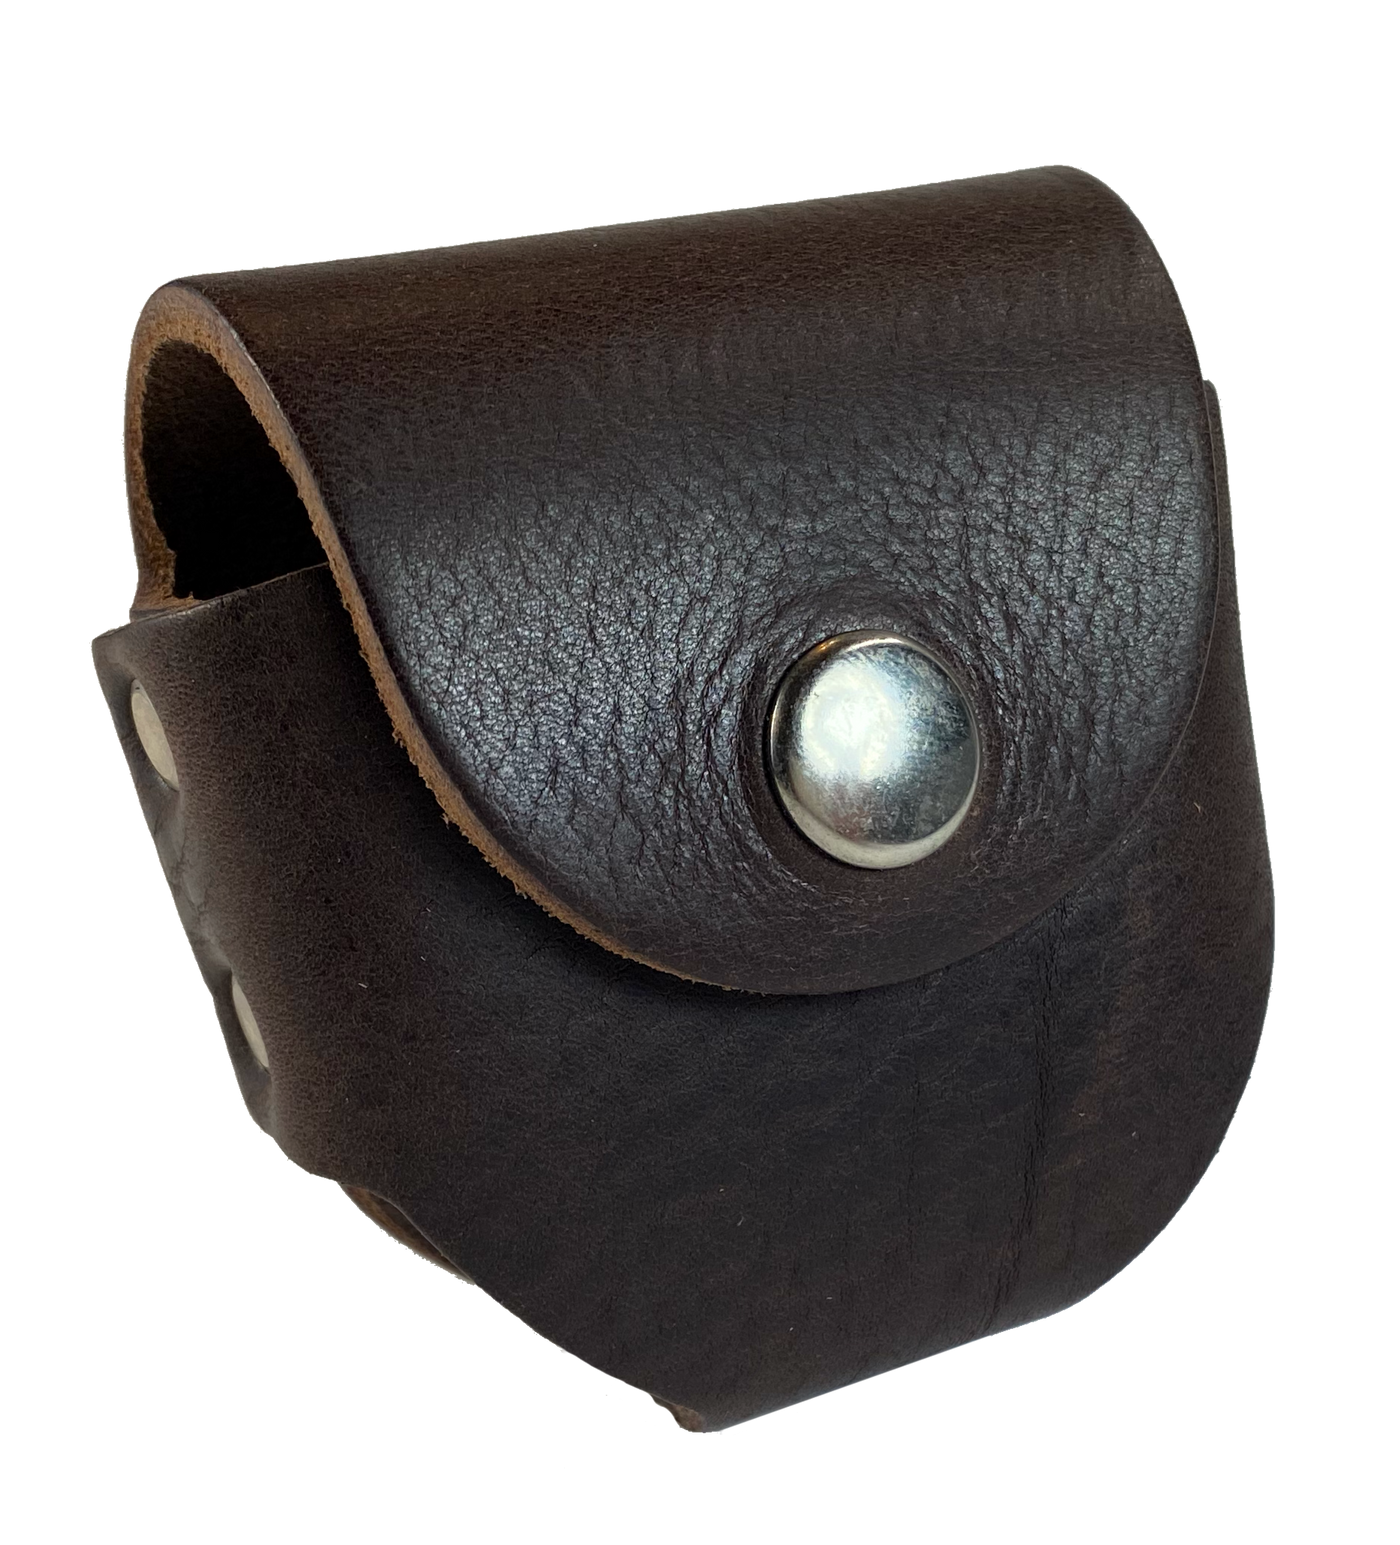 Made in USA Leather case to hold a can of snuff. Attaches to your belt. Snap closure. Available in Brown. Available online and in our retail shop in Smyrna, TN. 